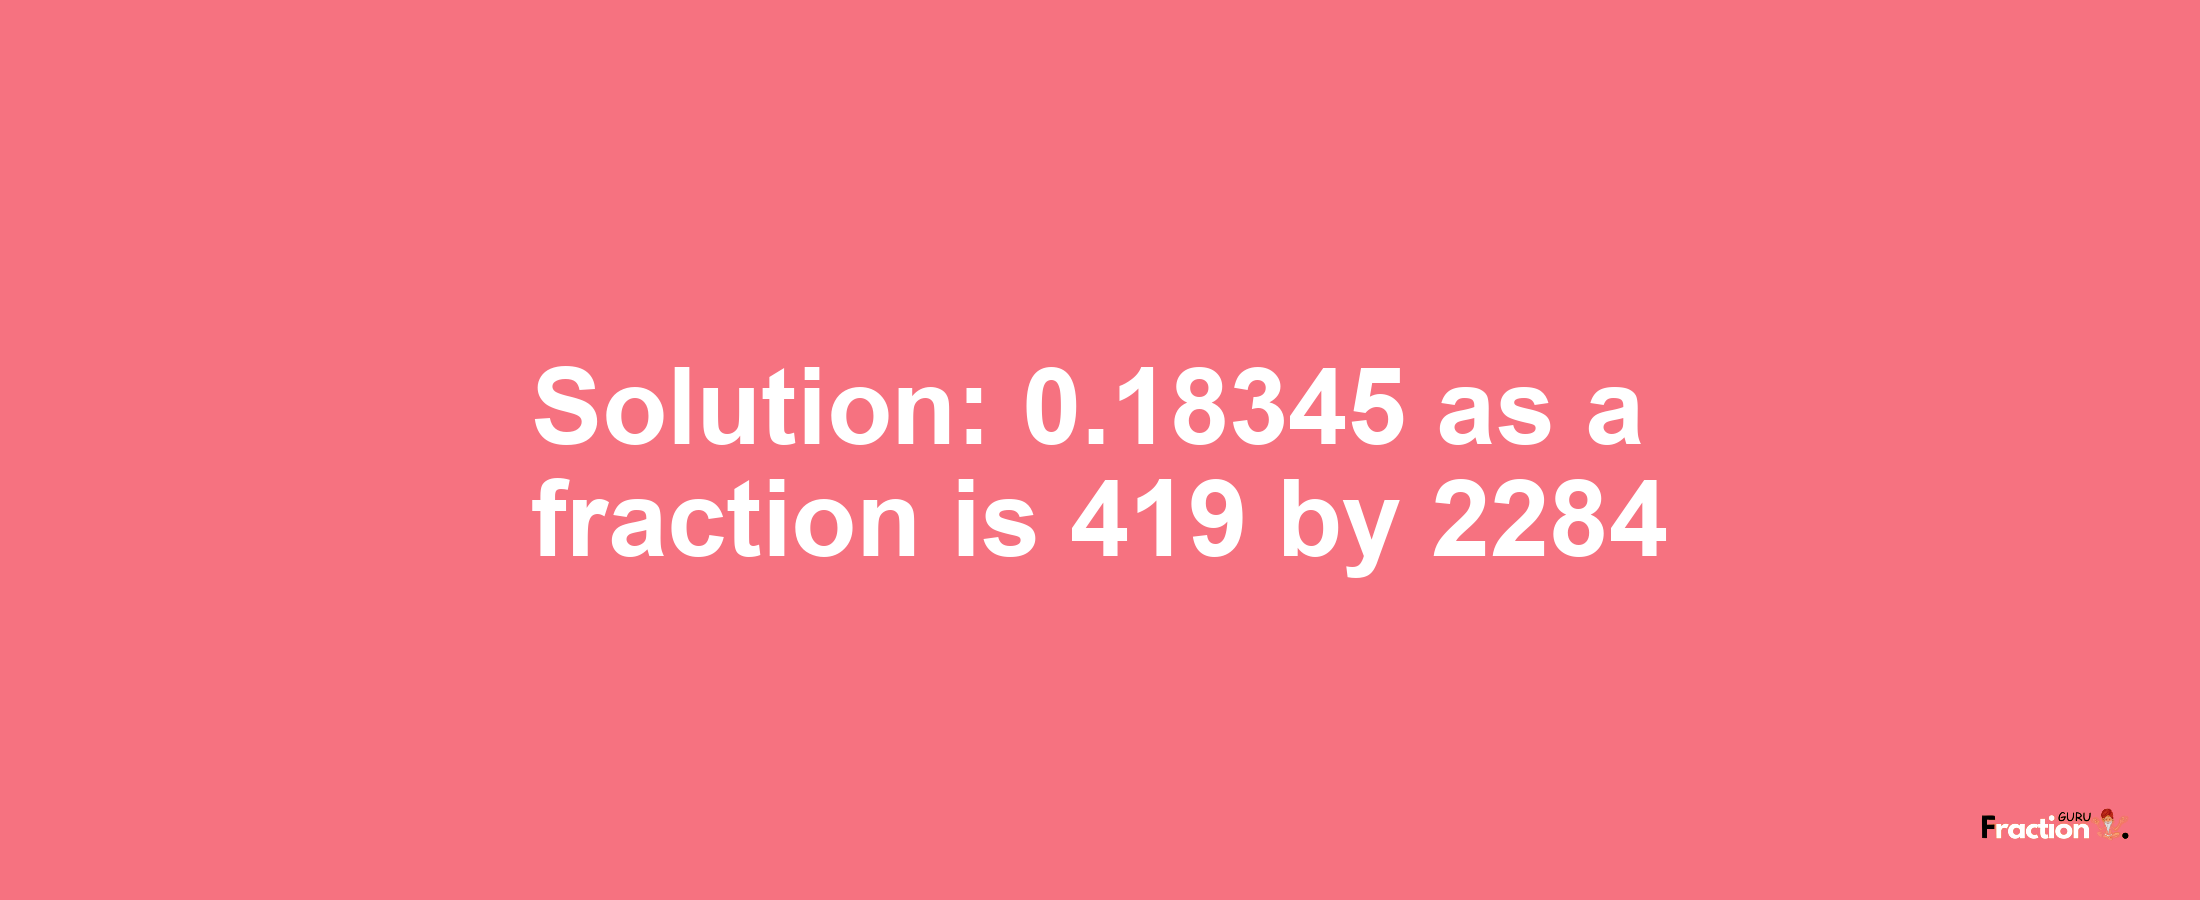 Solution:0.18345 as a fraction is 419/2284